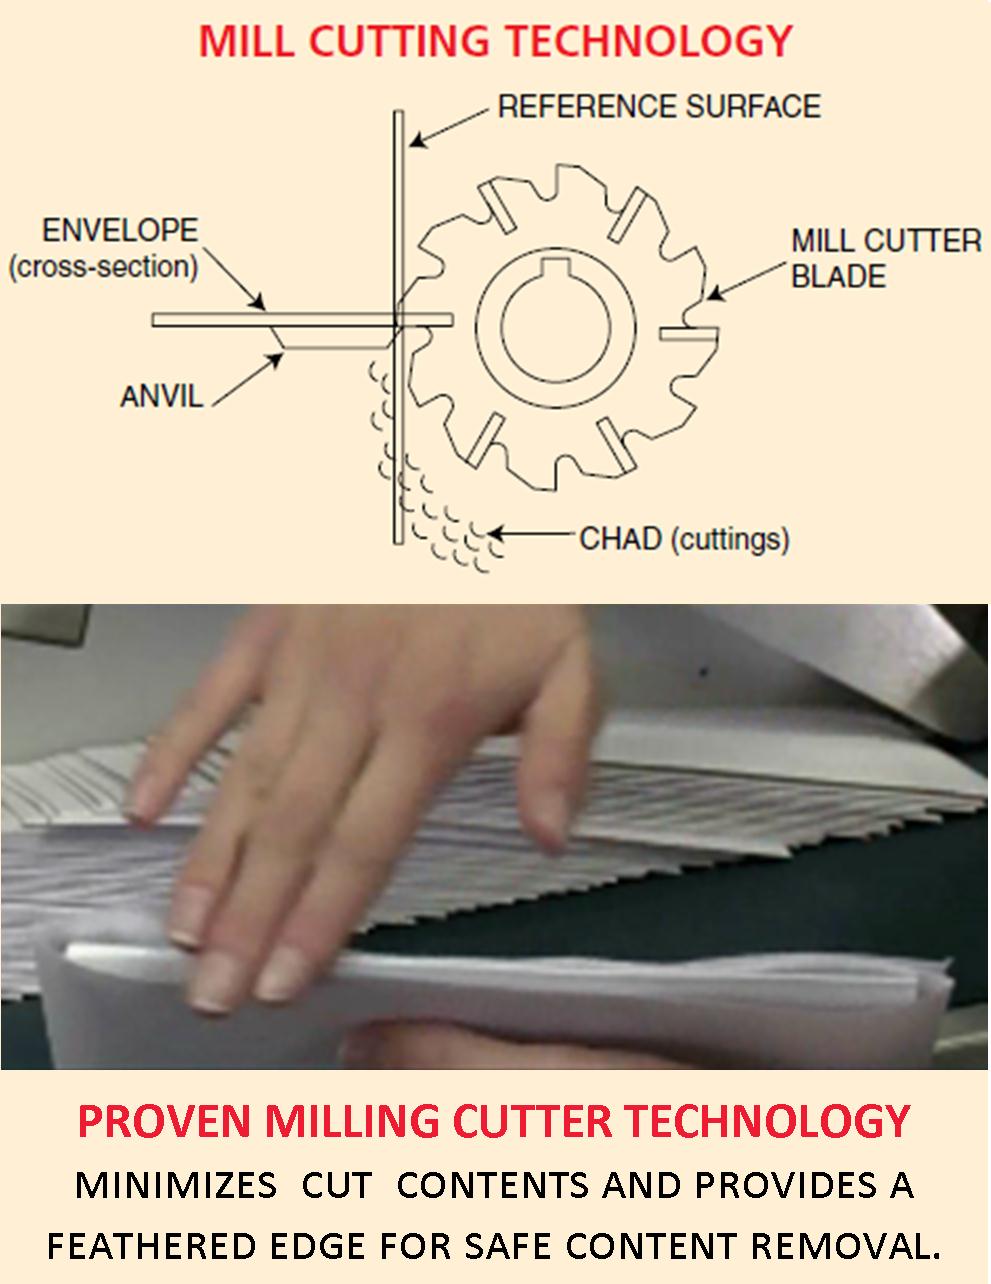 MCT - Milling Cutter Technology